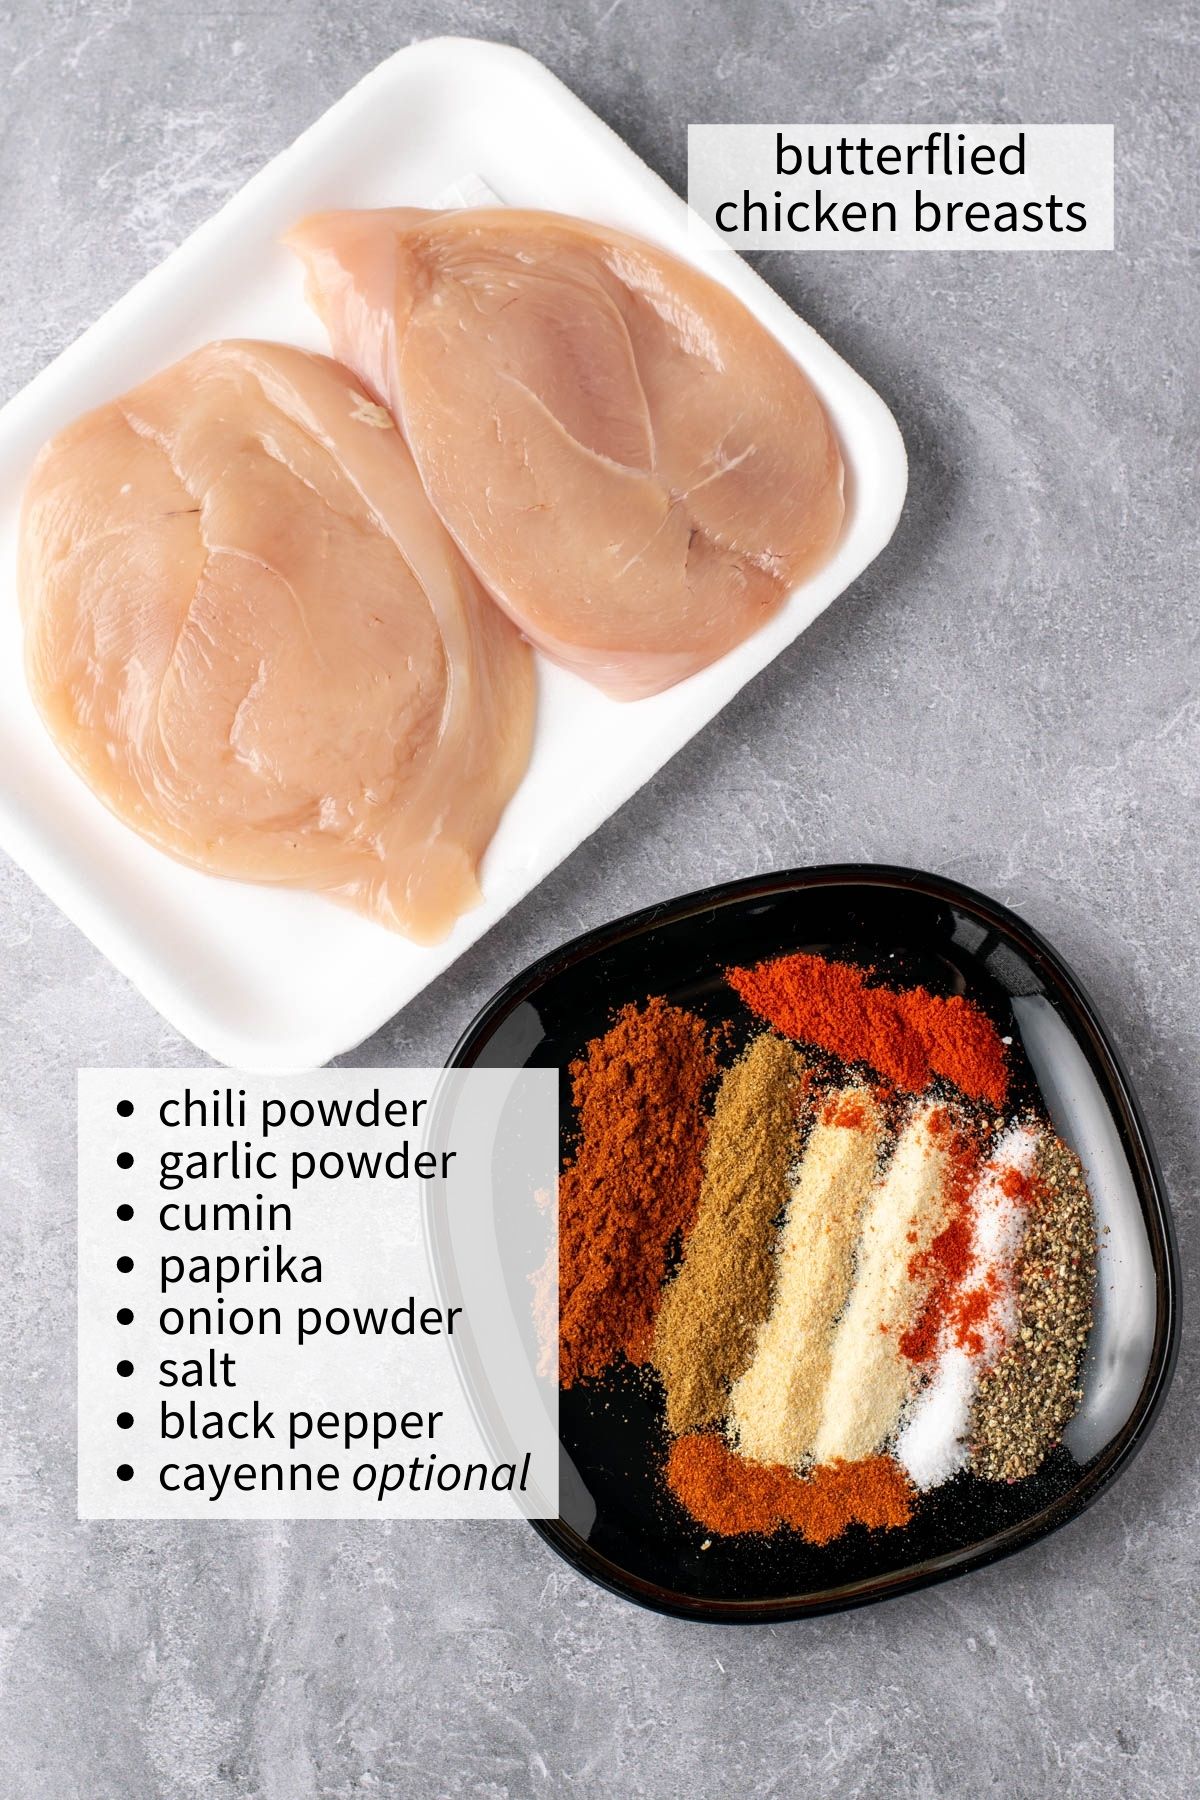 raw chicken breasts and spice mix